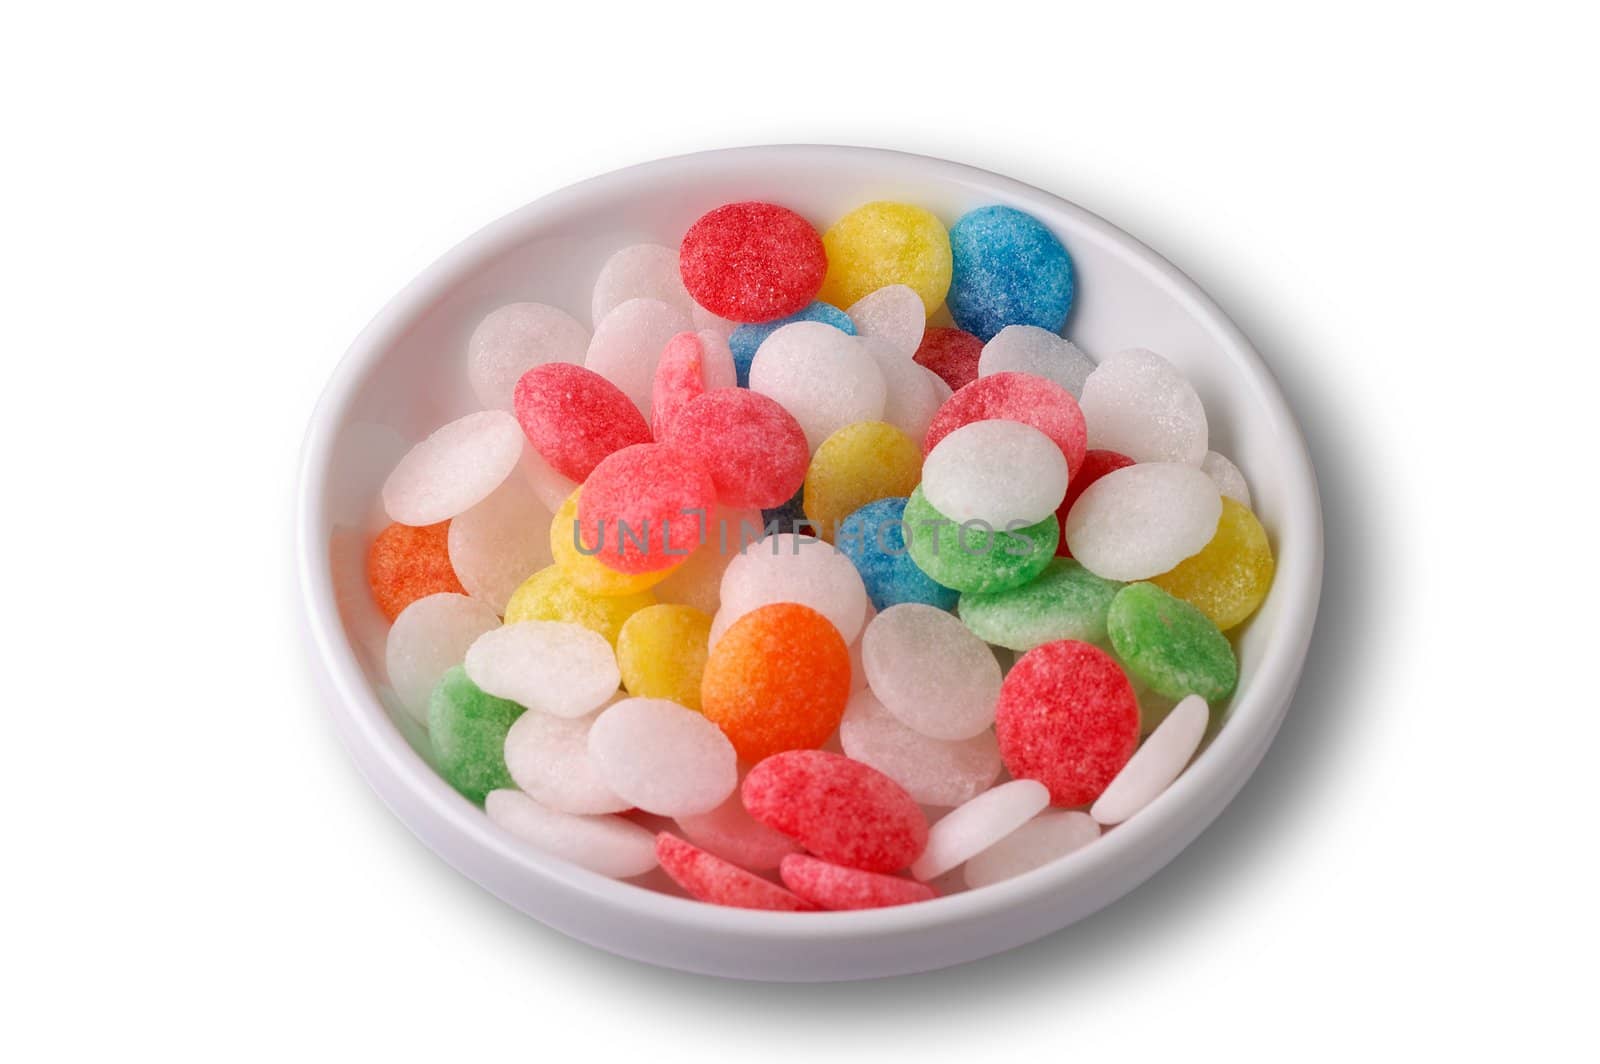 Candies in a dish closeup - with clipping path by Laborer